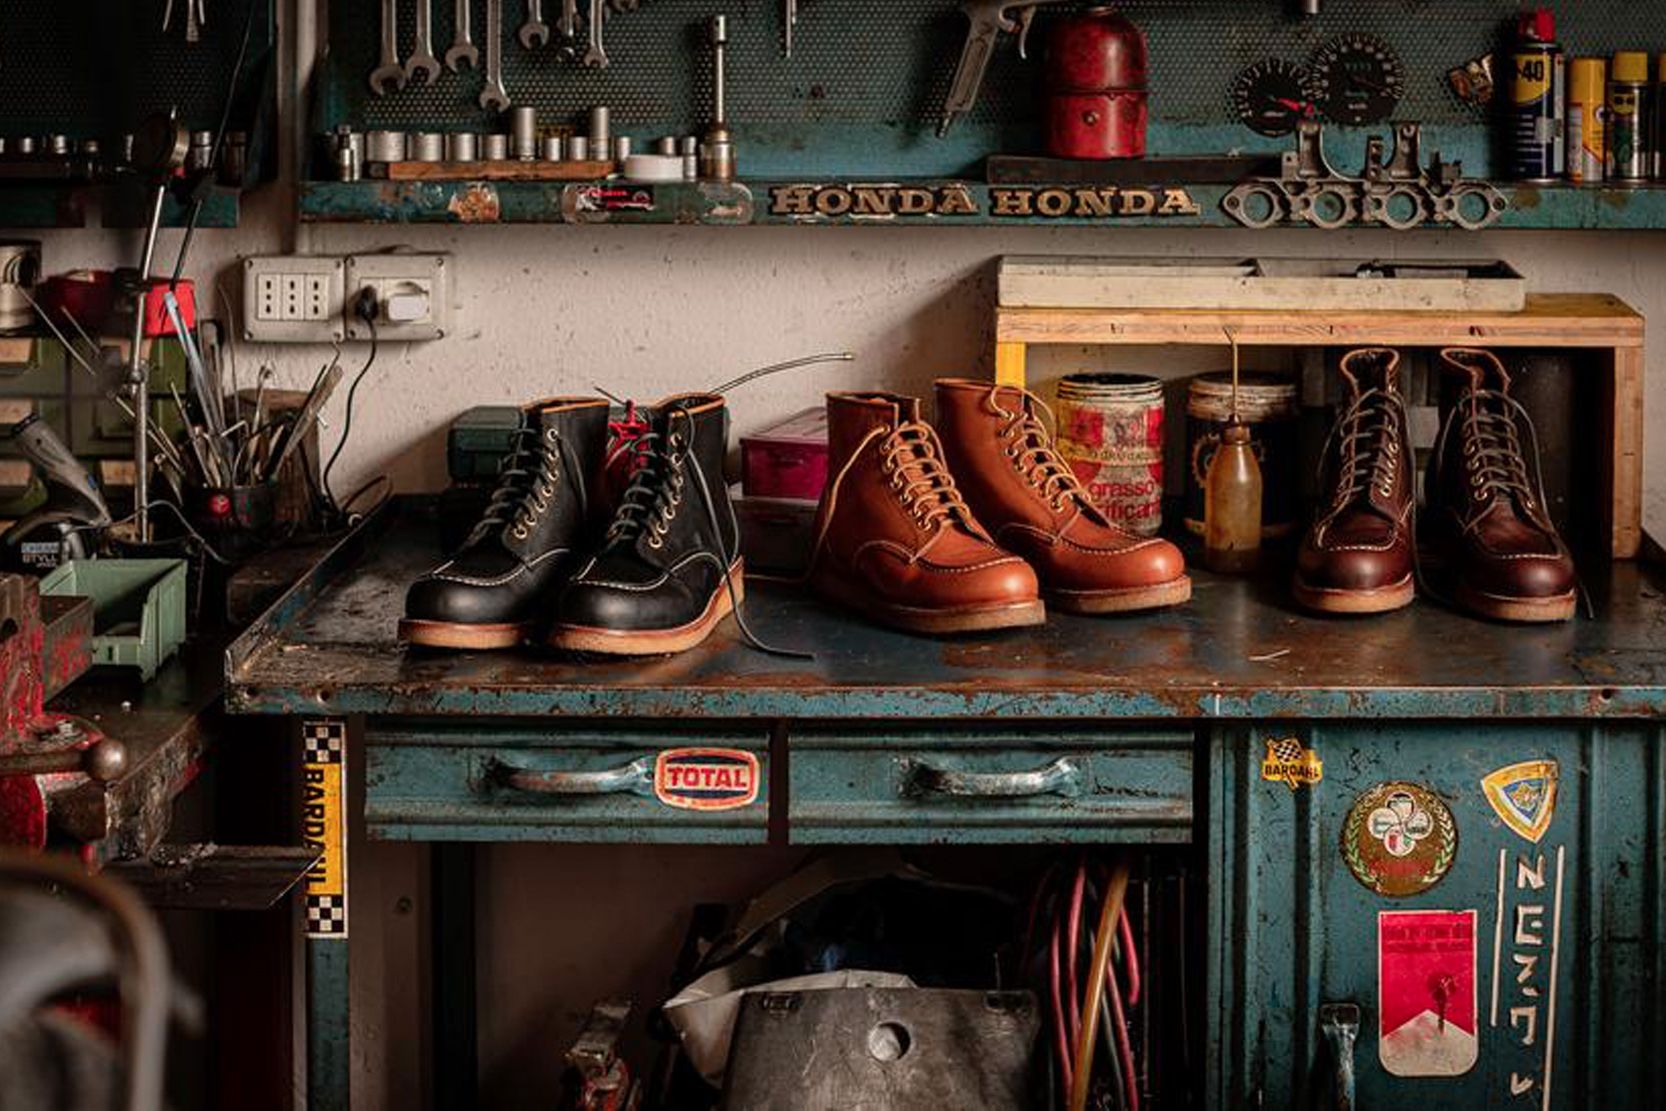 These Red Wing boots are made for women to walk in (finally)